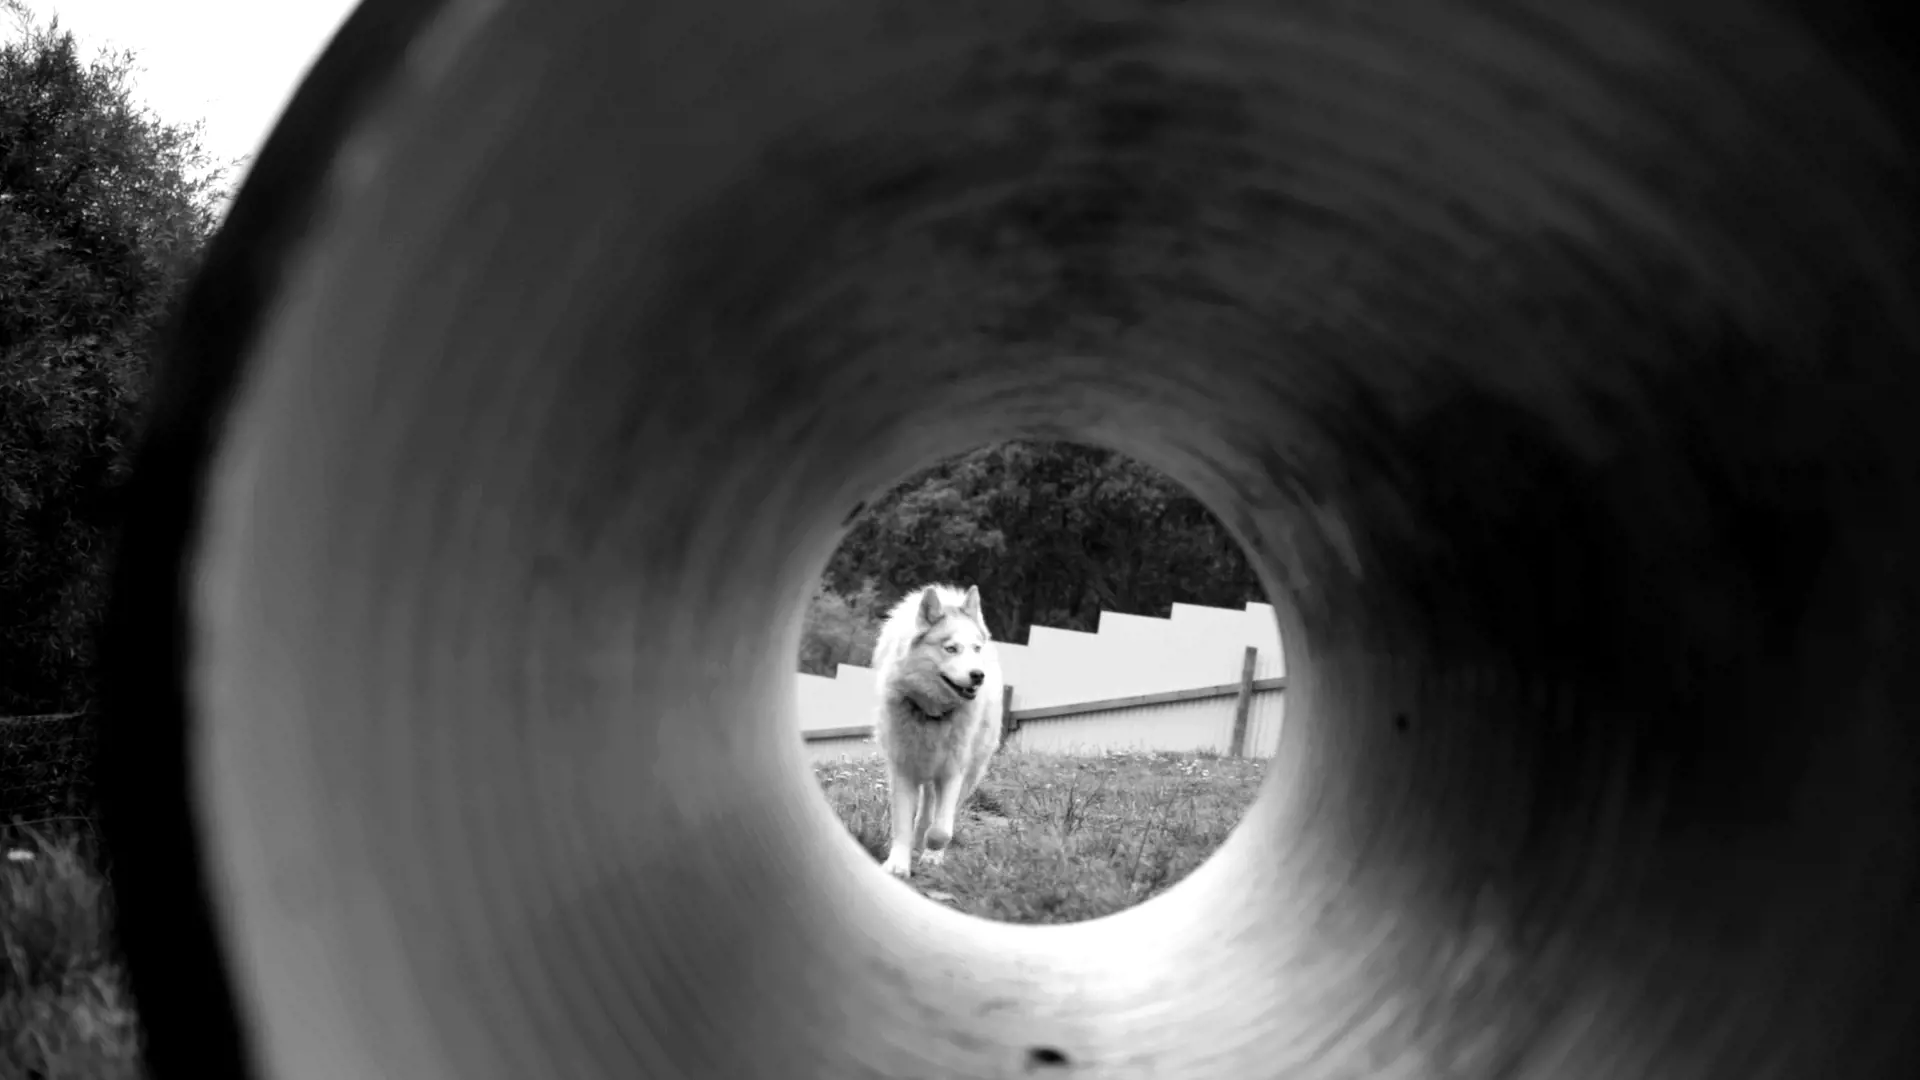 A large white husky stands in a yard at the end of the opening to a large concrete pipe.